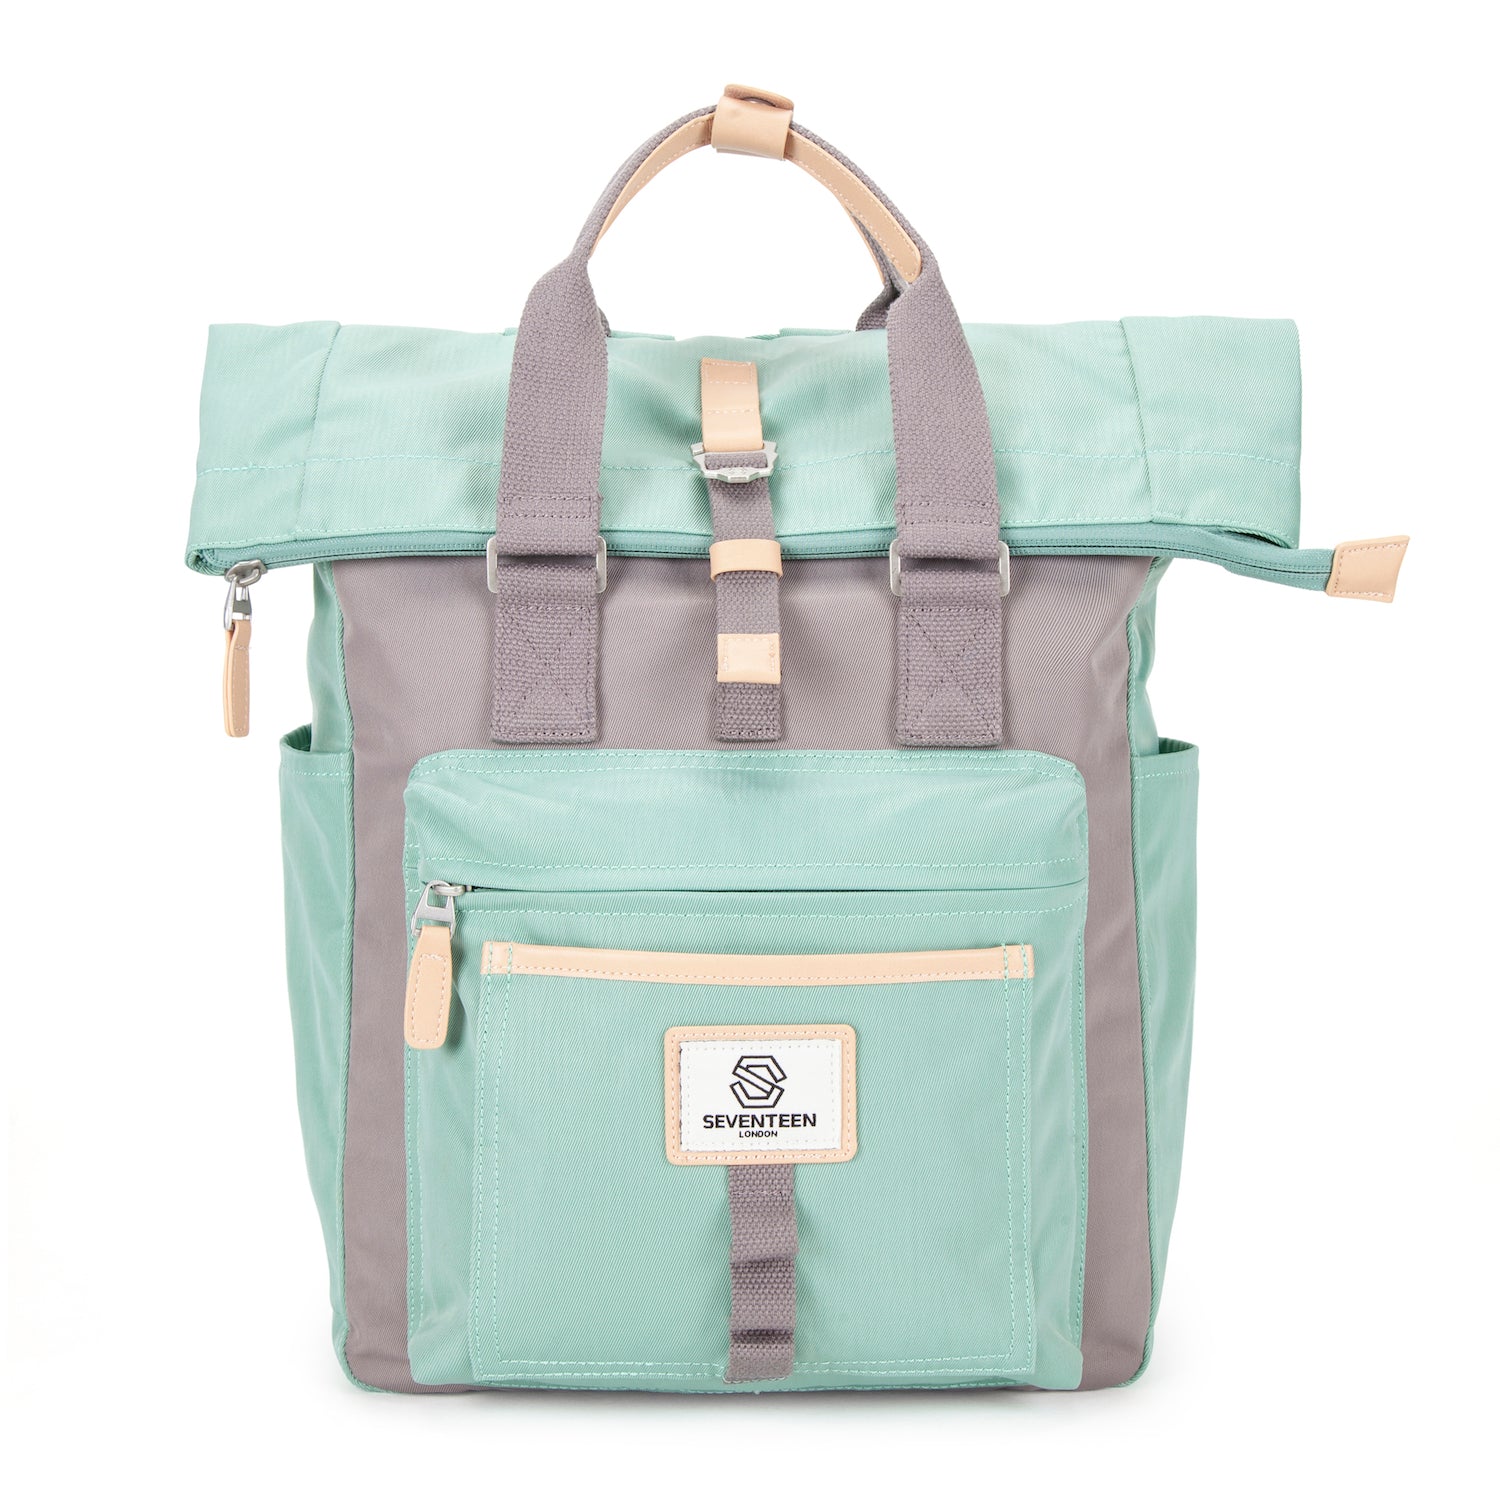 Canary Wharf Backpack - Pastel Green with Grey